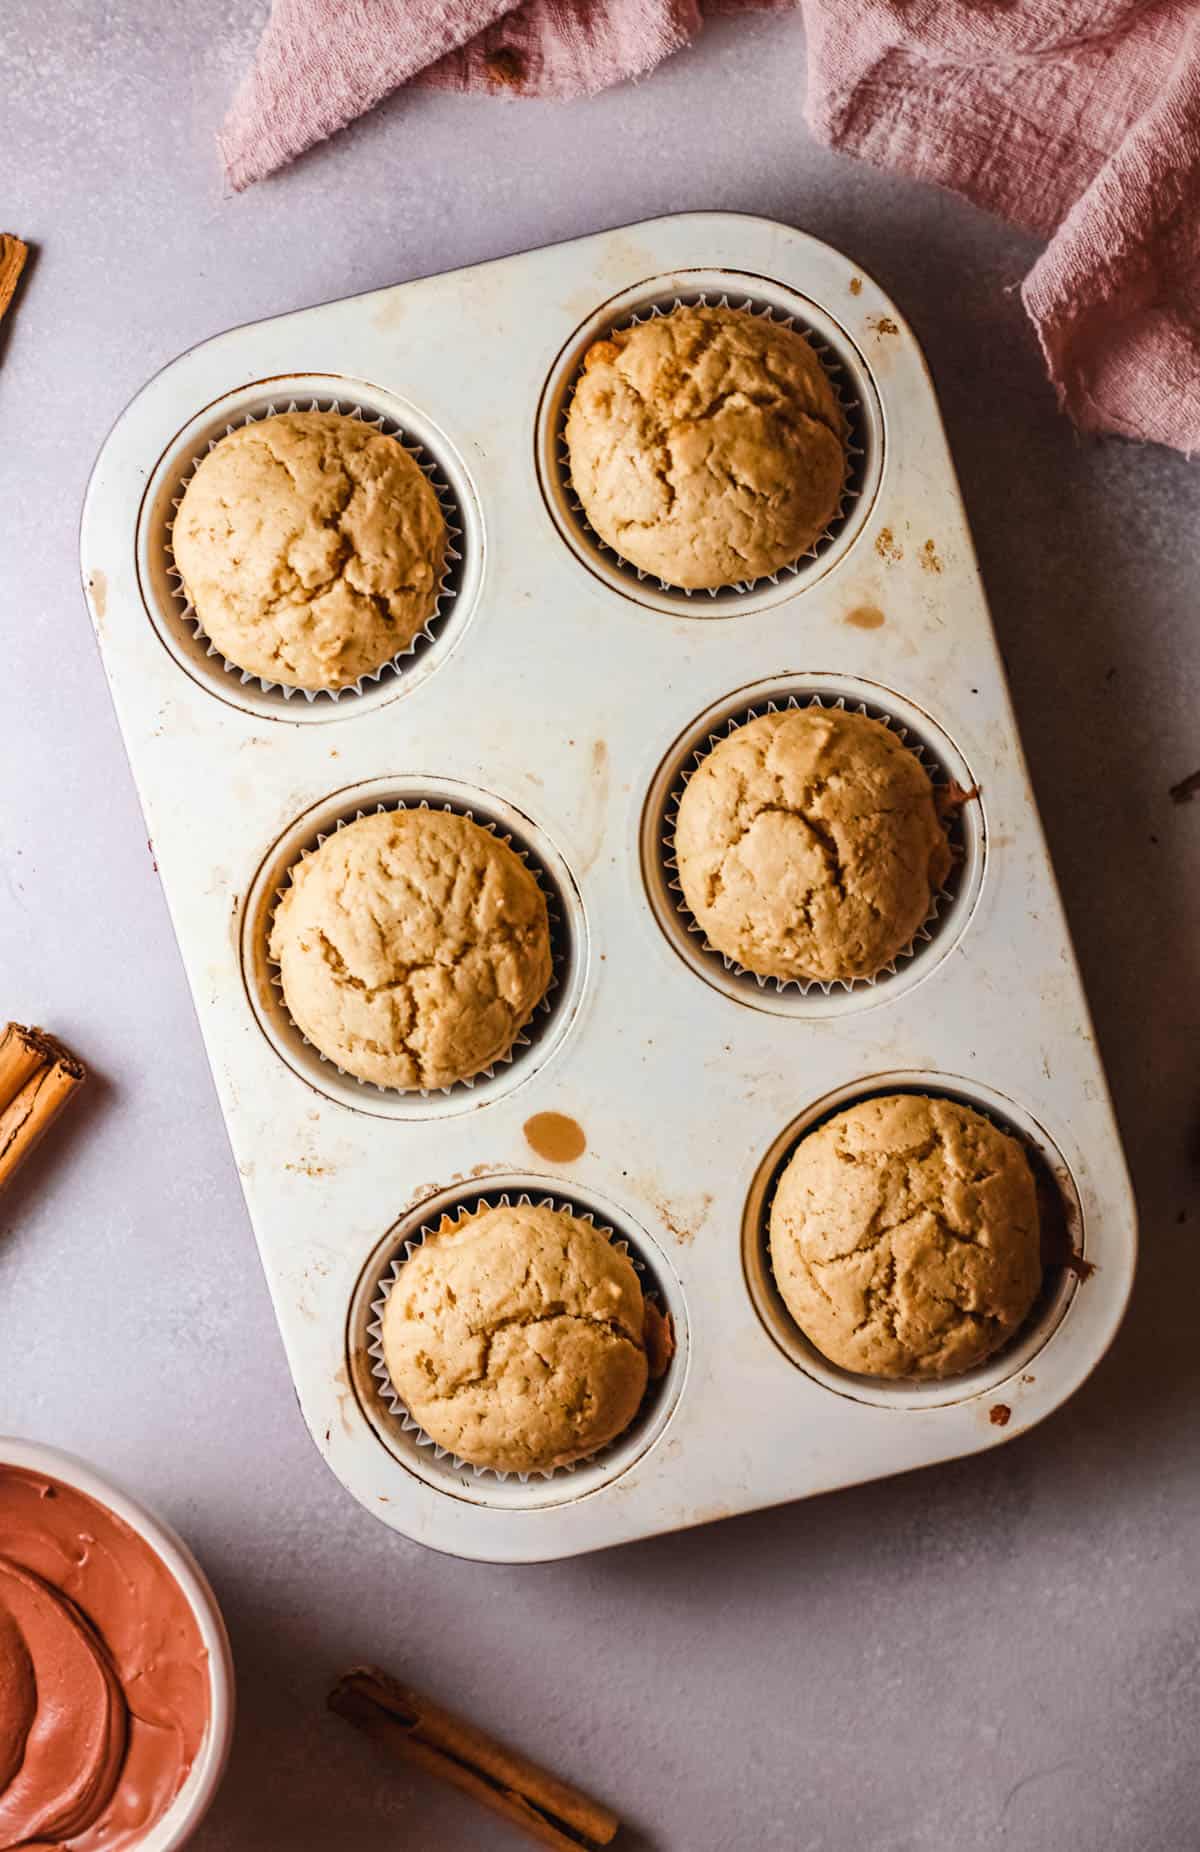 A cupcake pan holding baked cupcakes on a table.